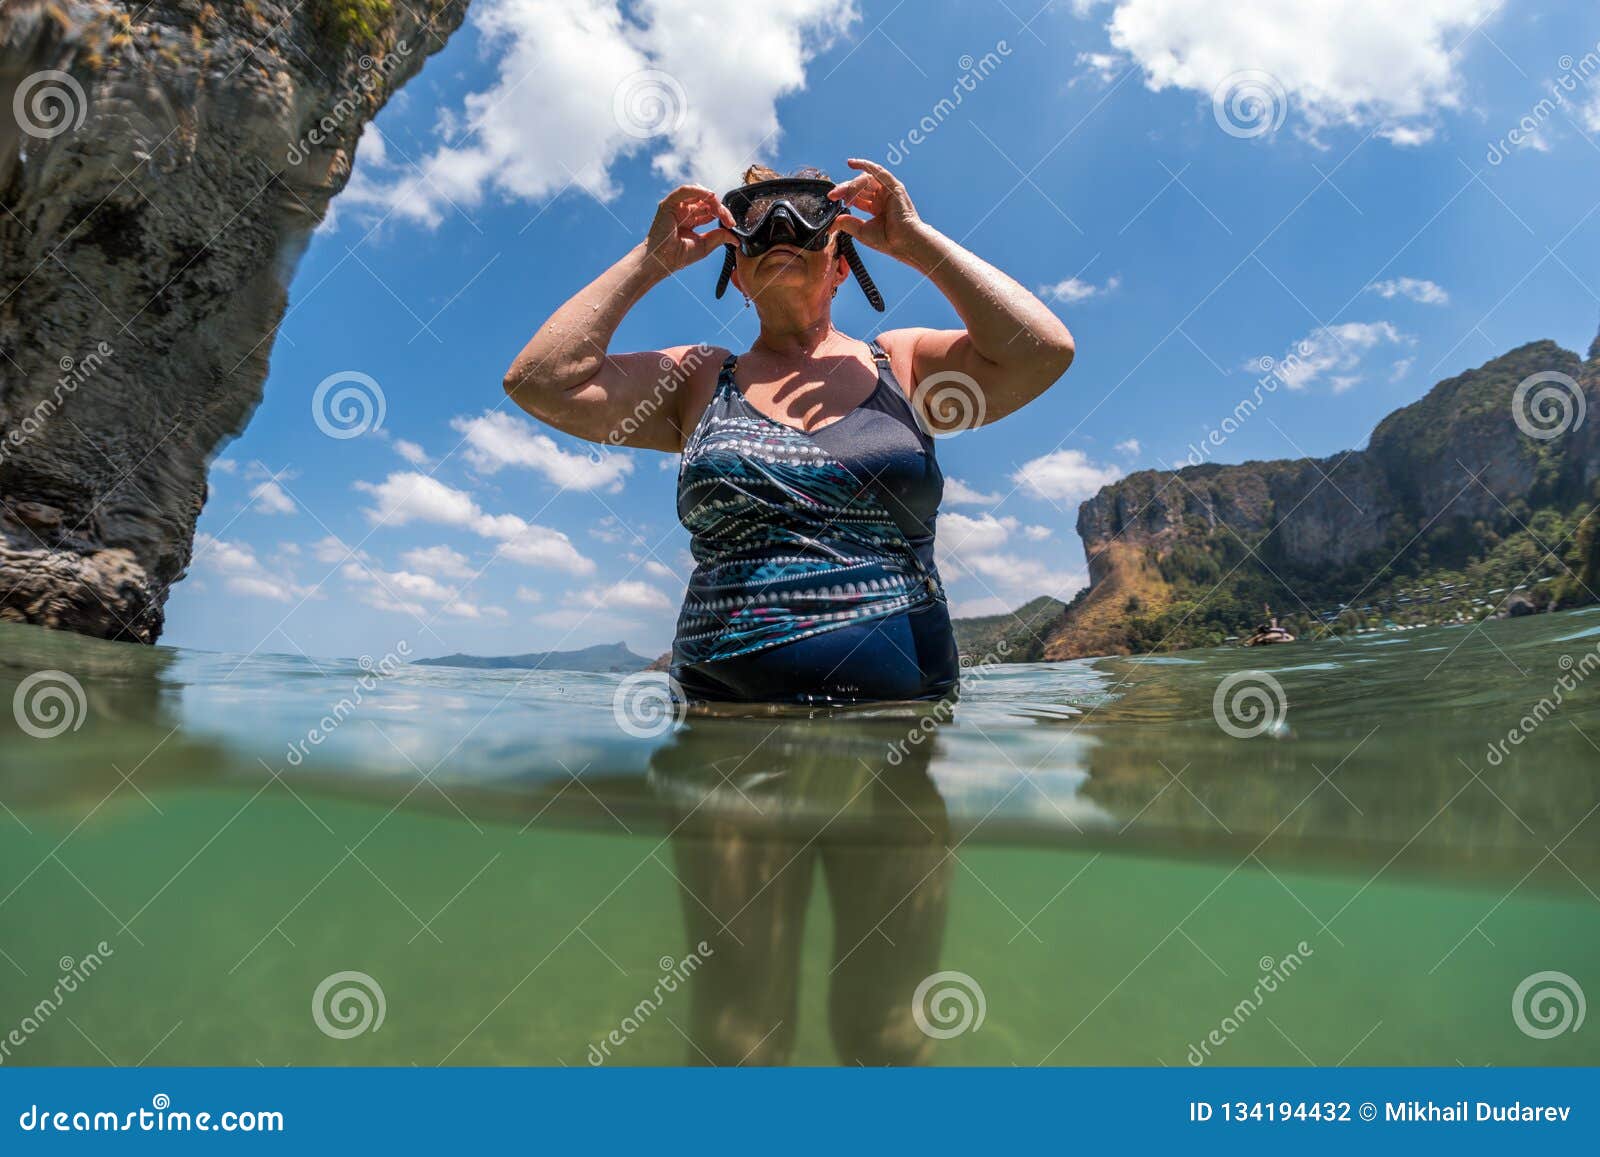 woman in years going to immerse underwater